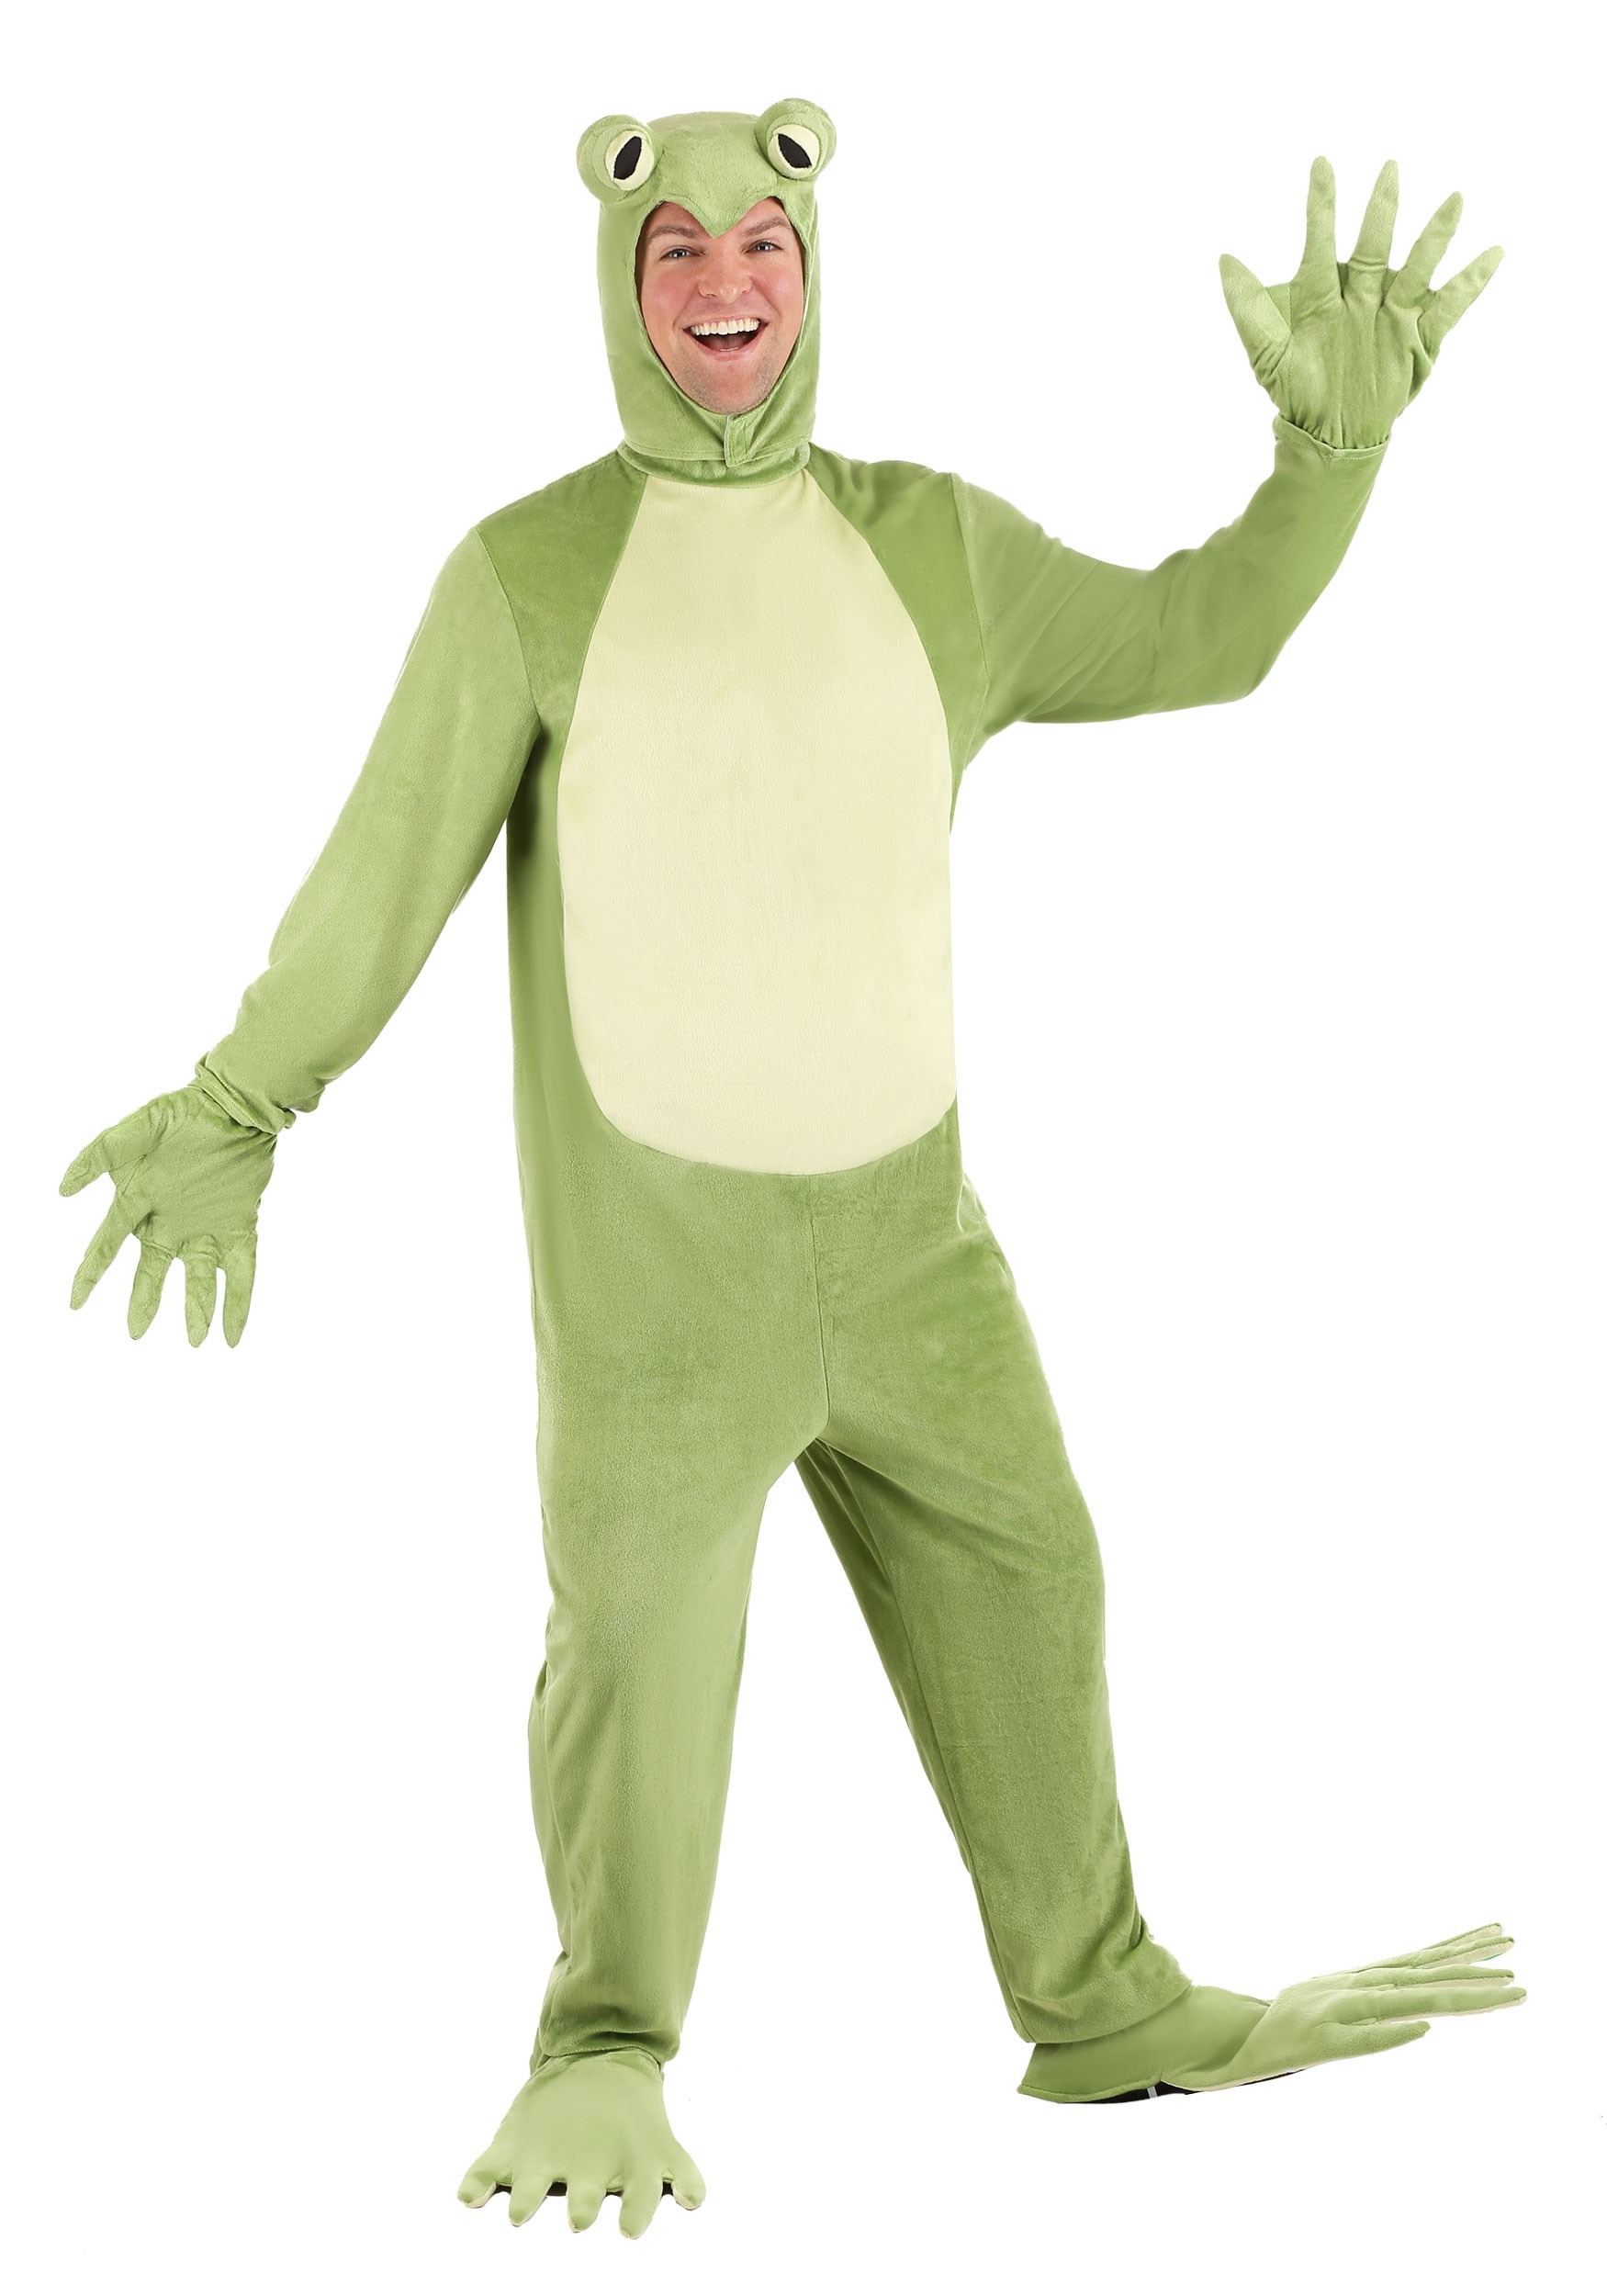 Image of Adult Deluxe Frog Costume ID FUN1605AD-L